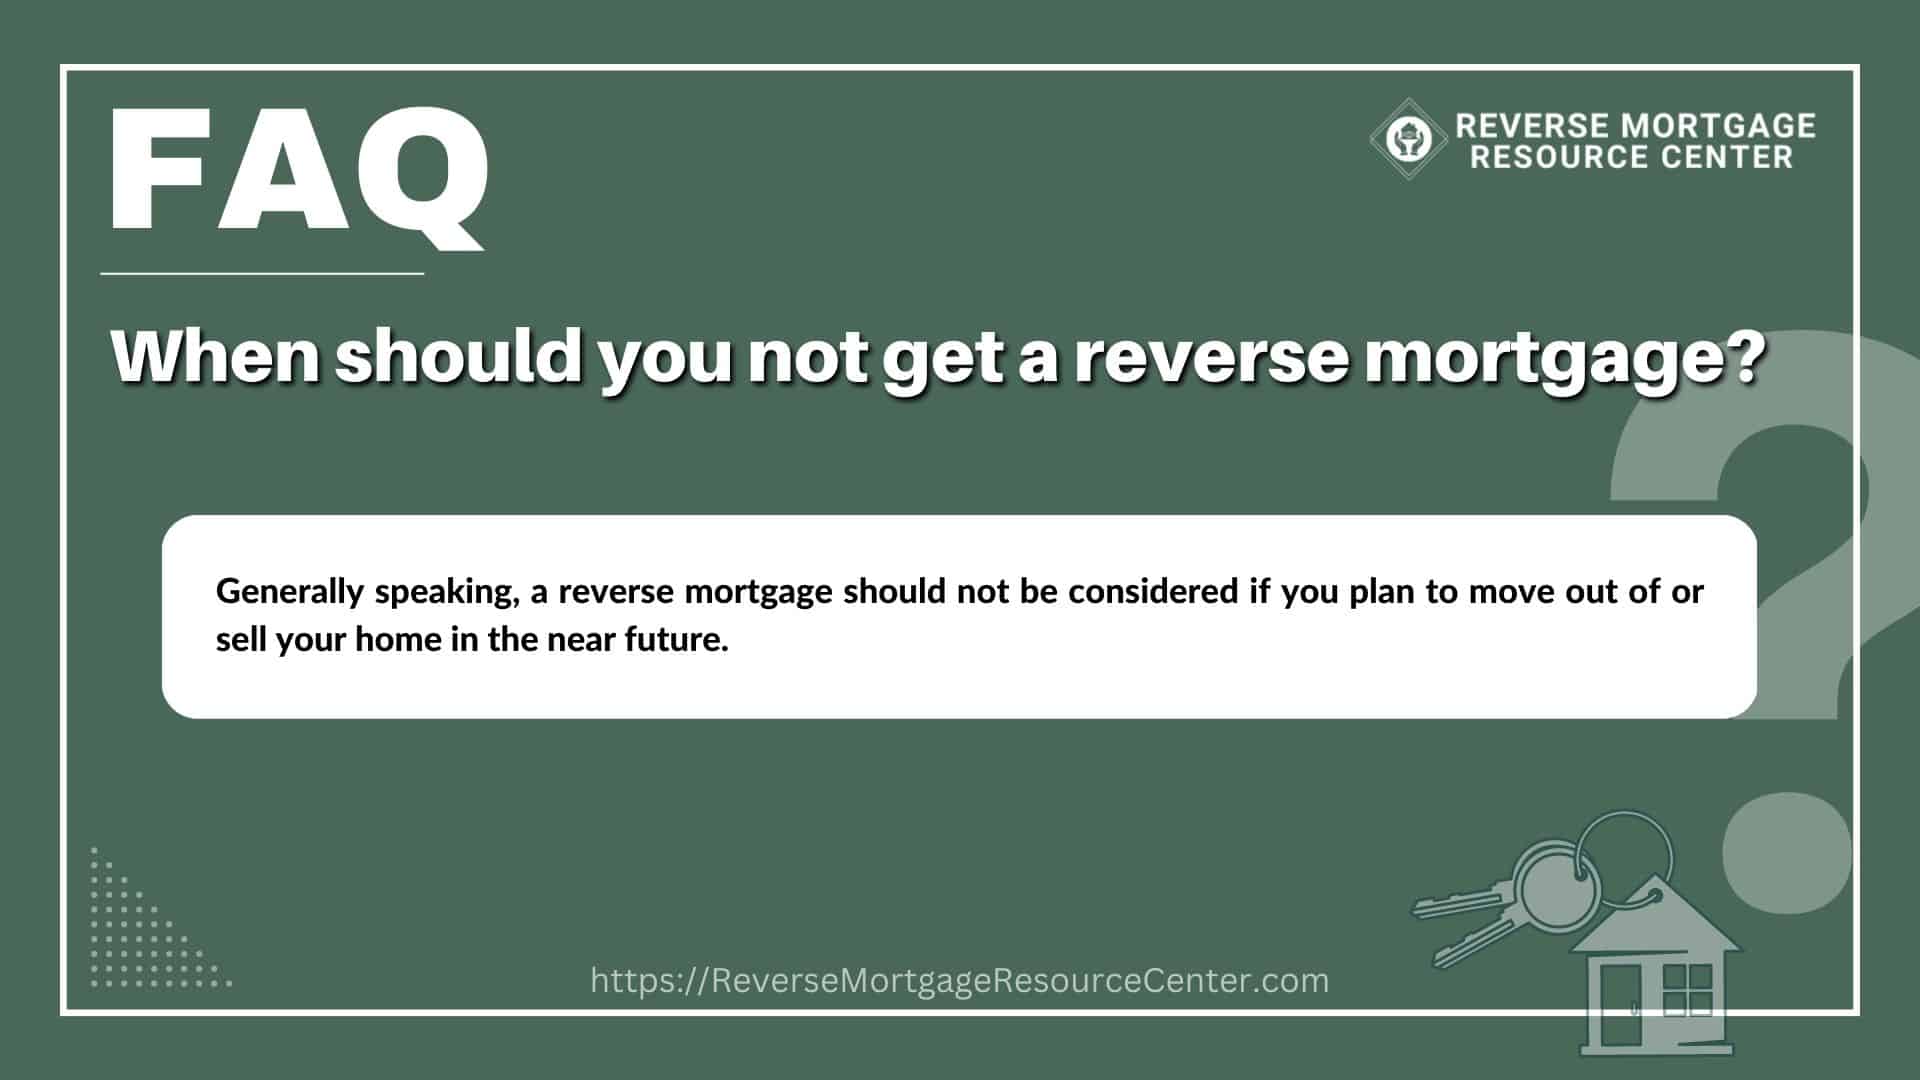 When should you not get a reverse mortgage?